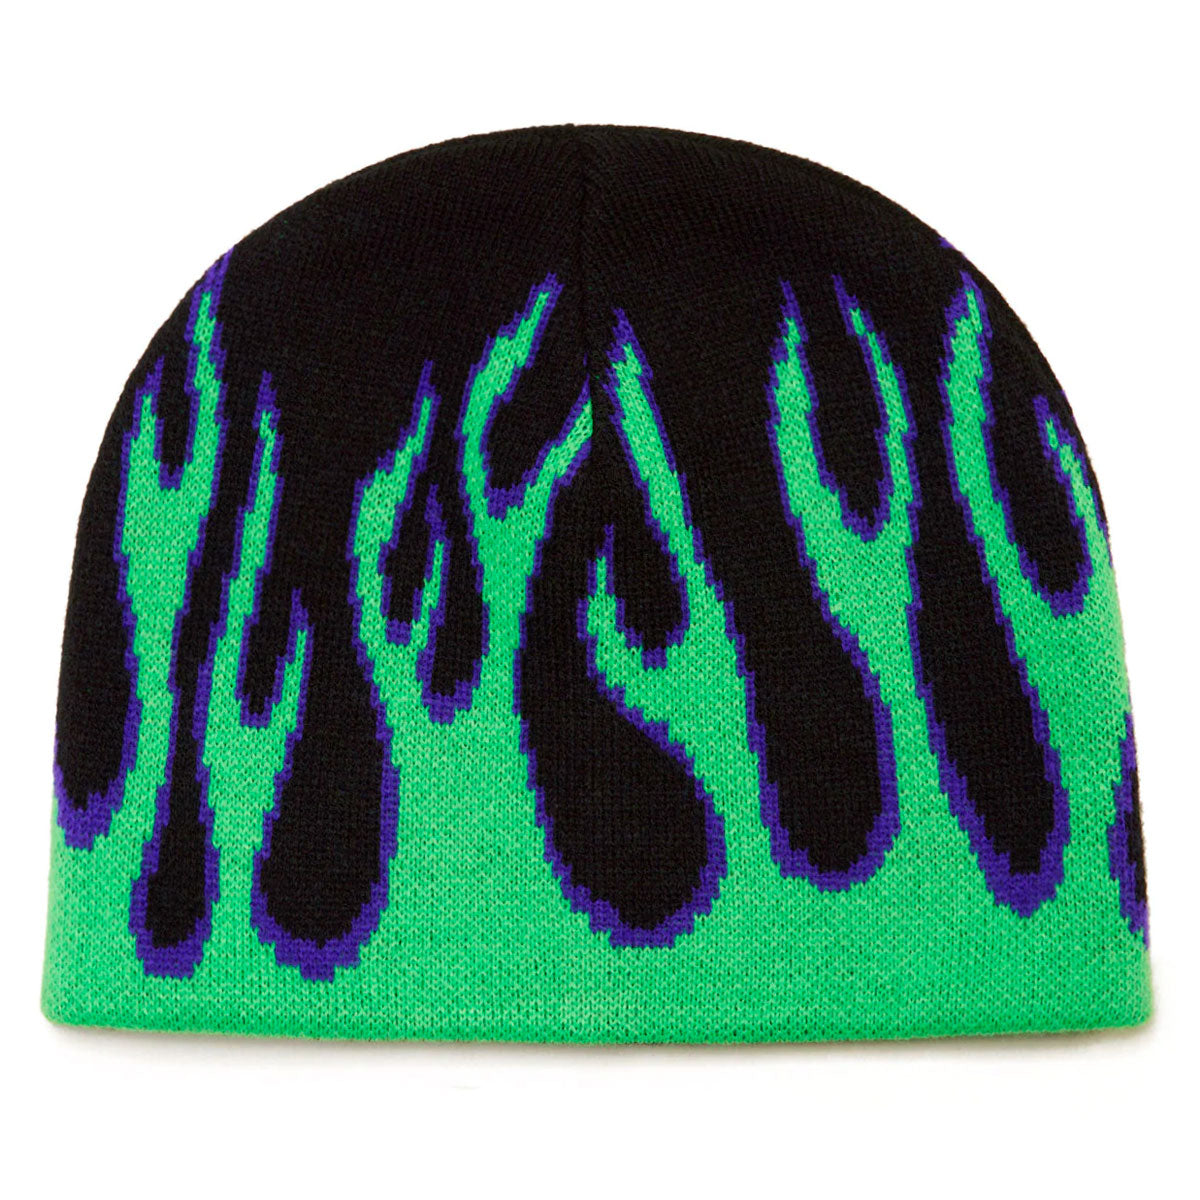 CCS Flames Reversible Skully Beanie - Black/Green image 2